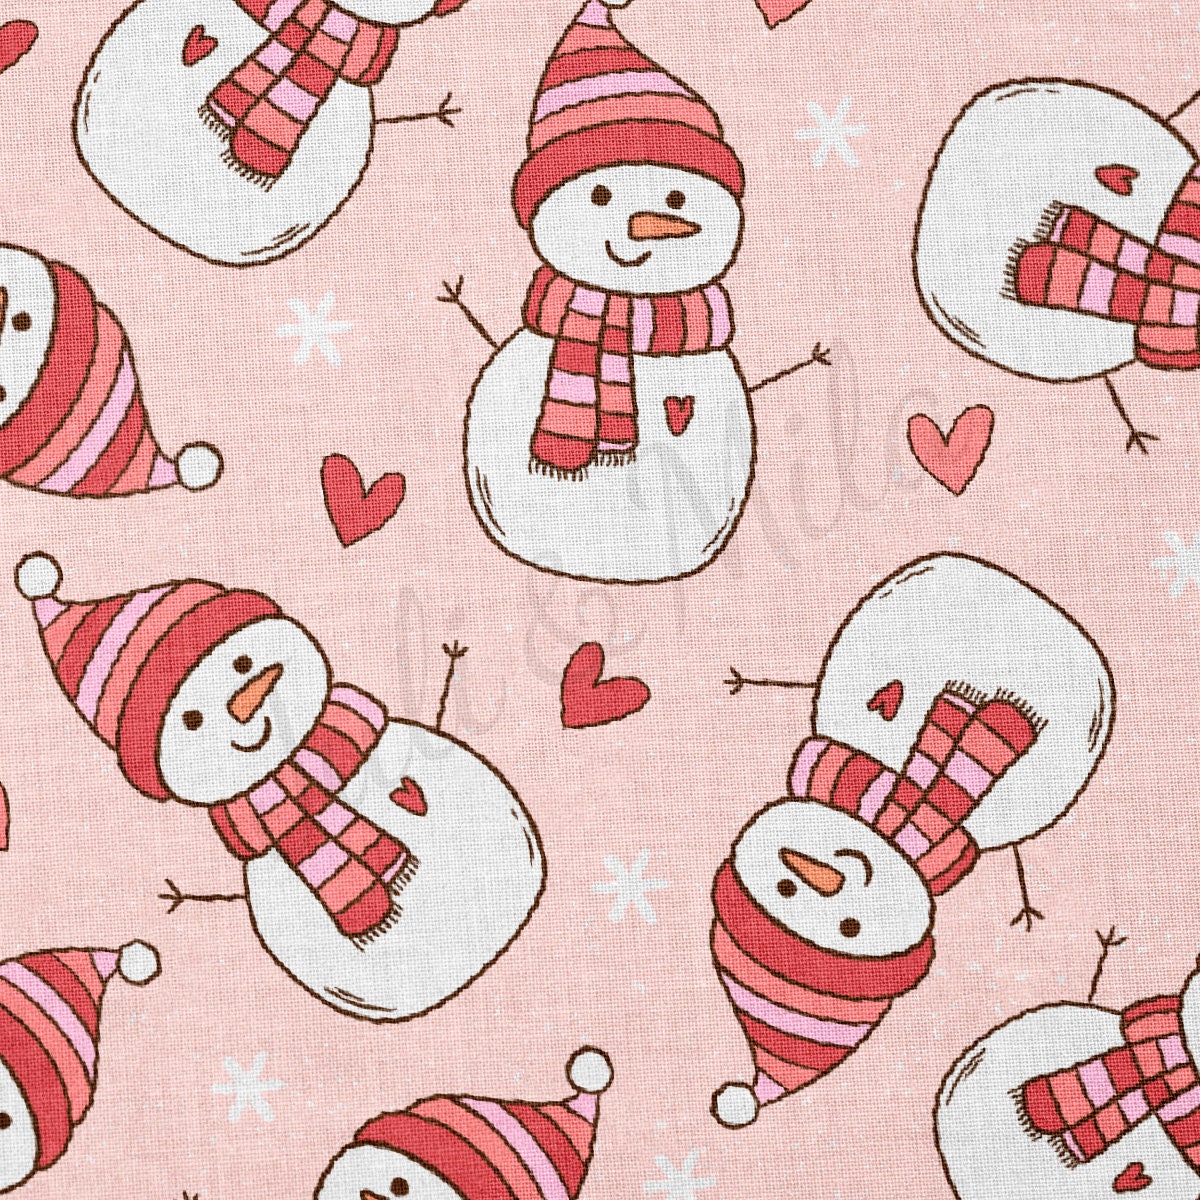 100% Cotton Fabric By the Yard Printed in USA Cotton Sateen -  Cotton CNT2064 Christmas